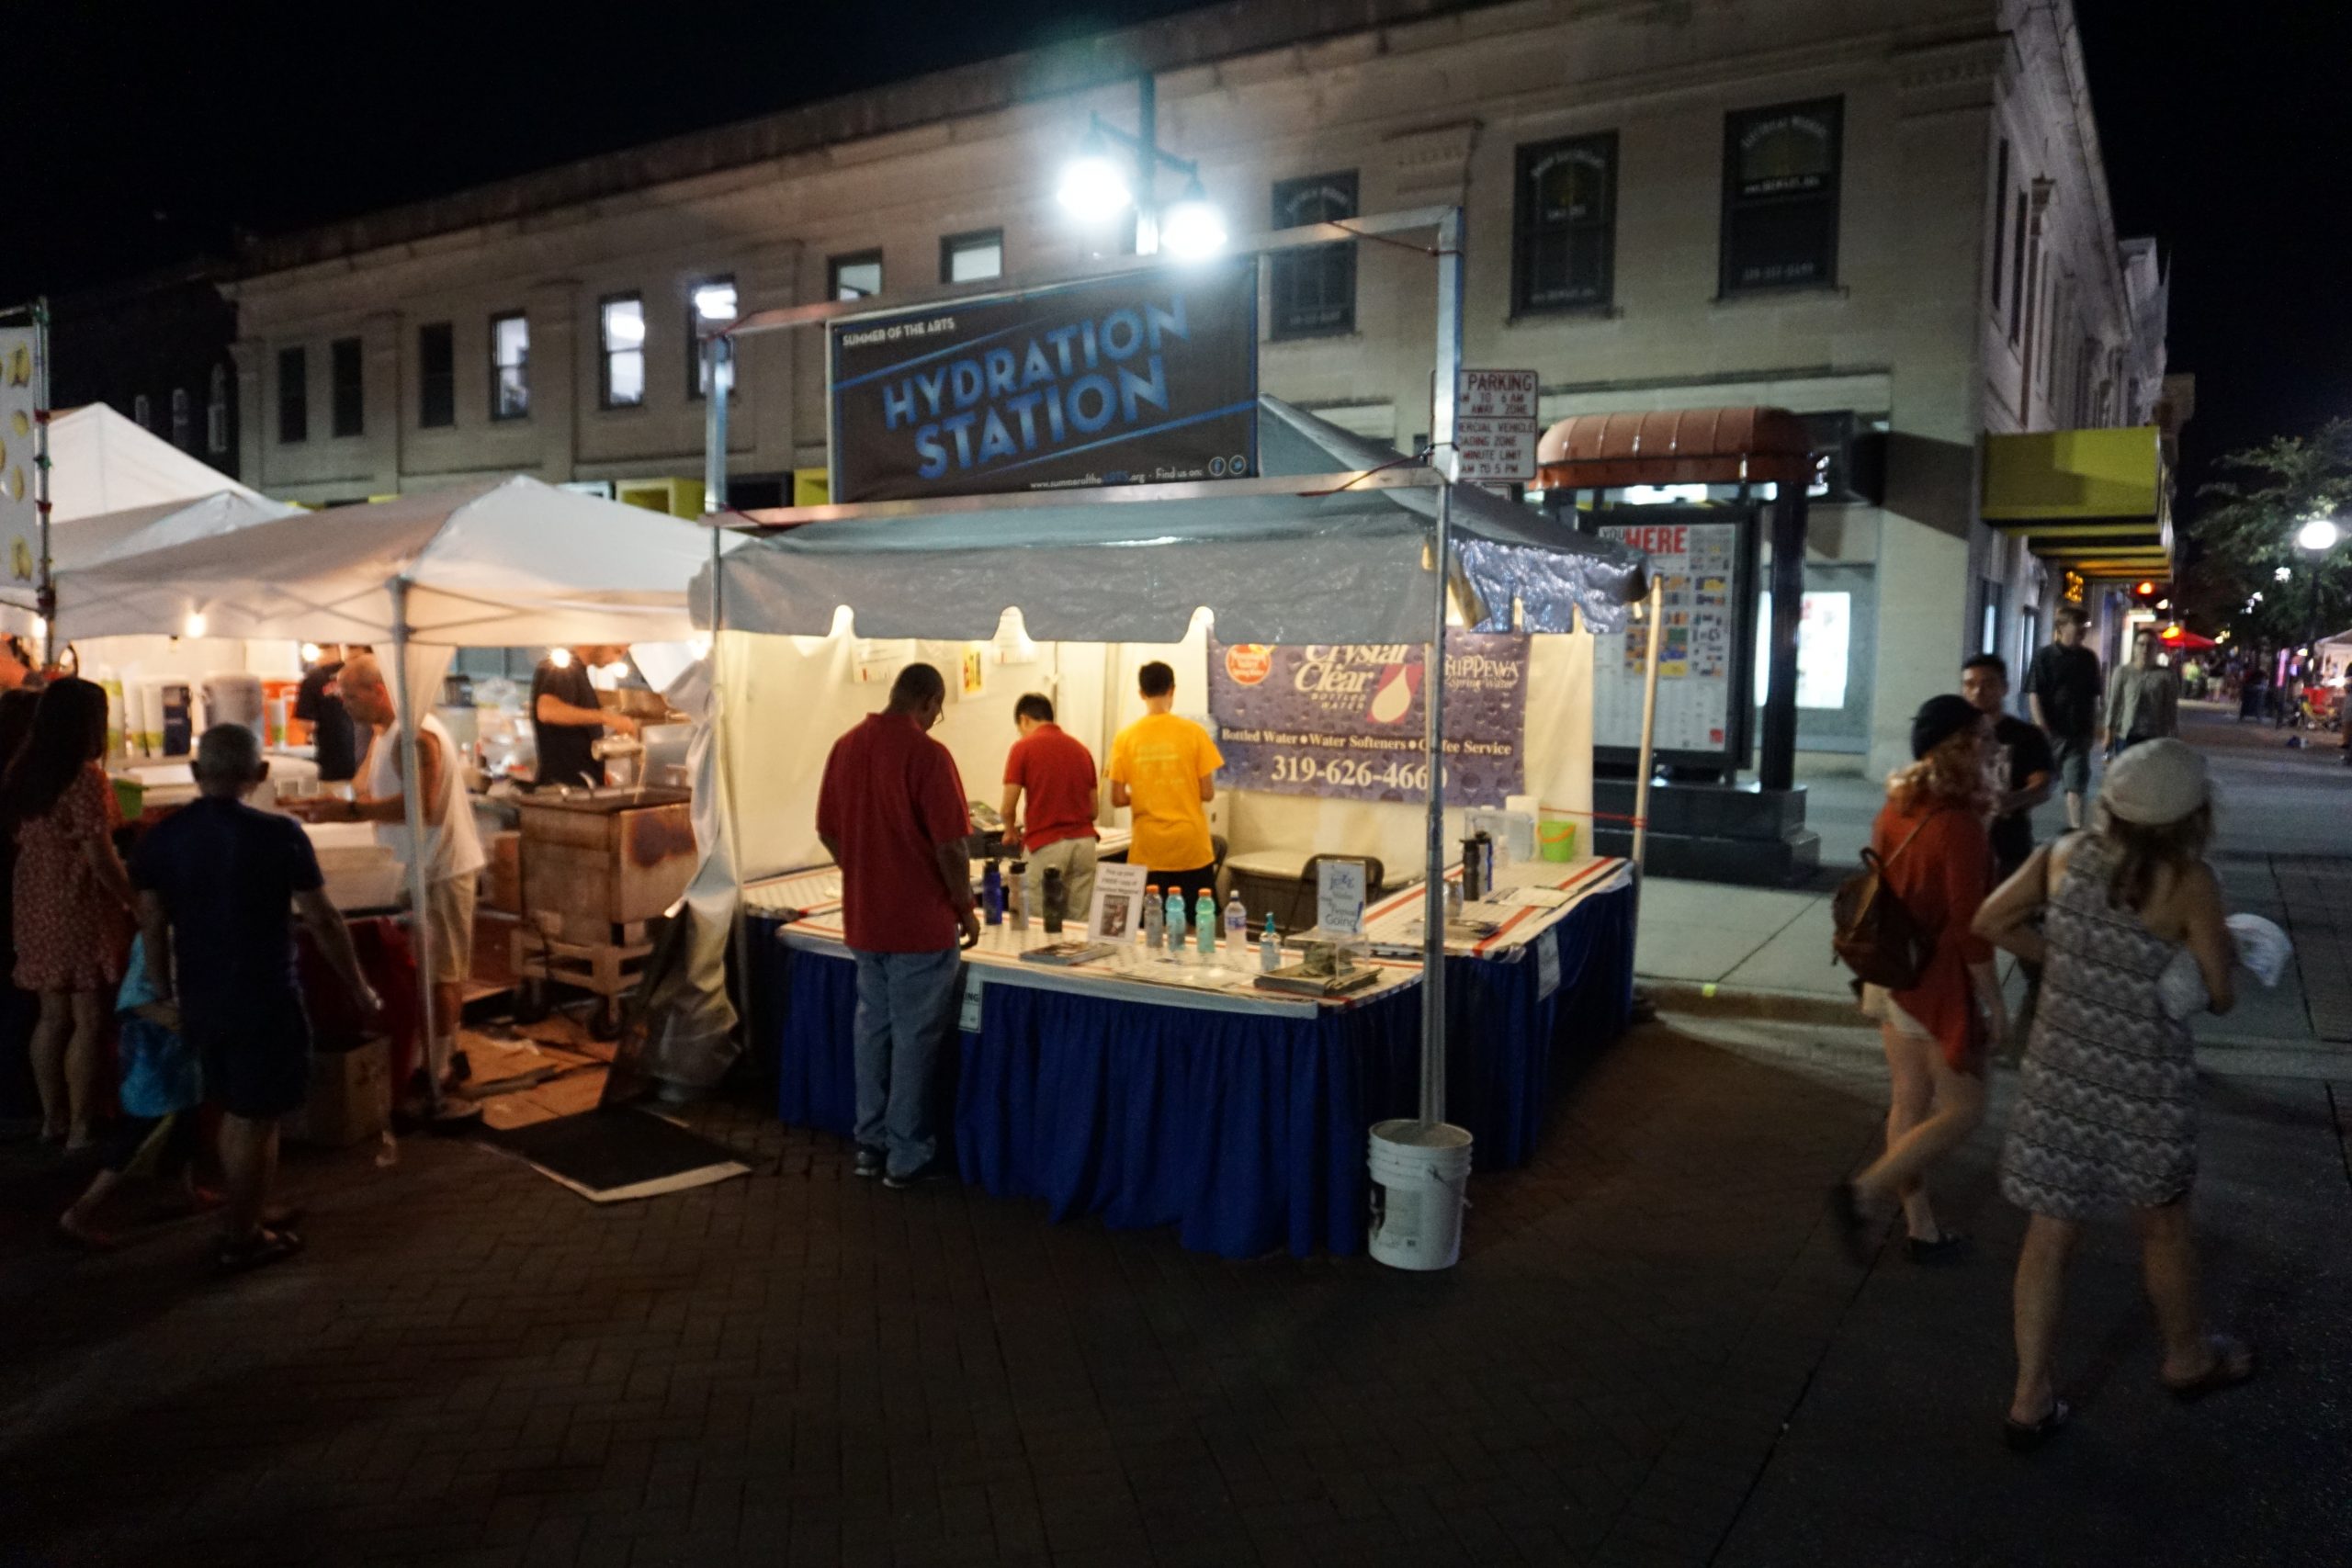 Hydration Station Tent at the 2017 Iowa City Jazz Festival